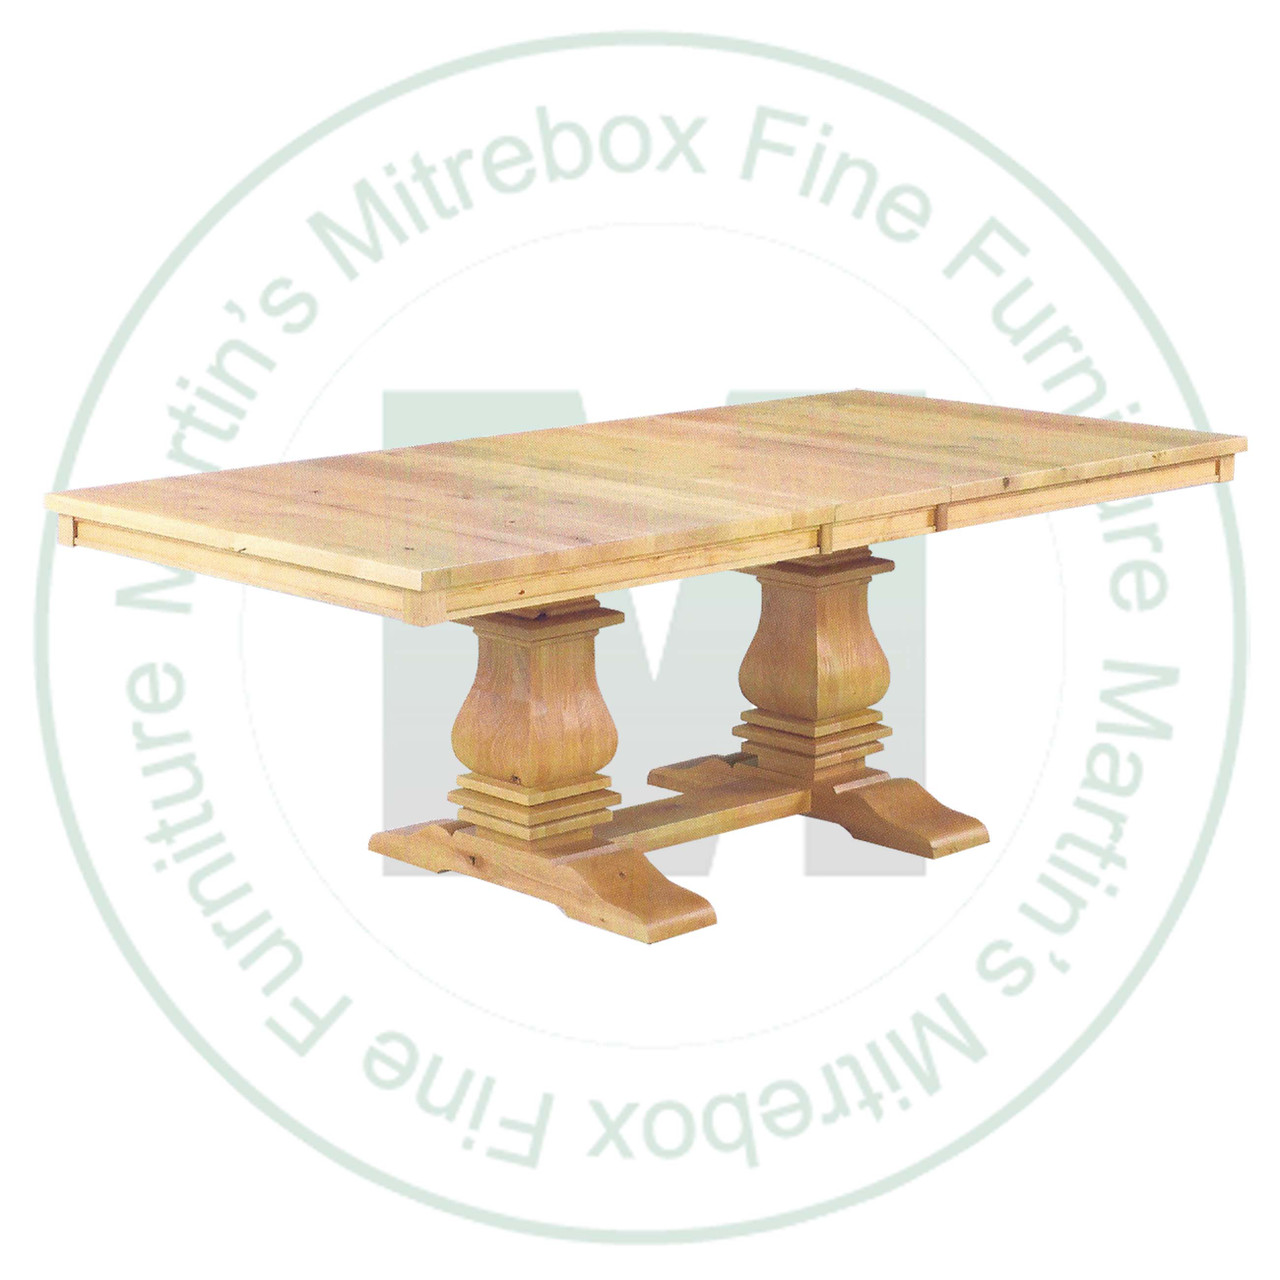 Oak Mediterranean Double Pedestal Table 42''D x 96''W x 30''H With 3 - 12'' Leaves. Table Has 1.25'' Thick Top